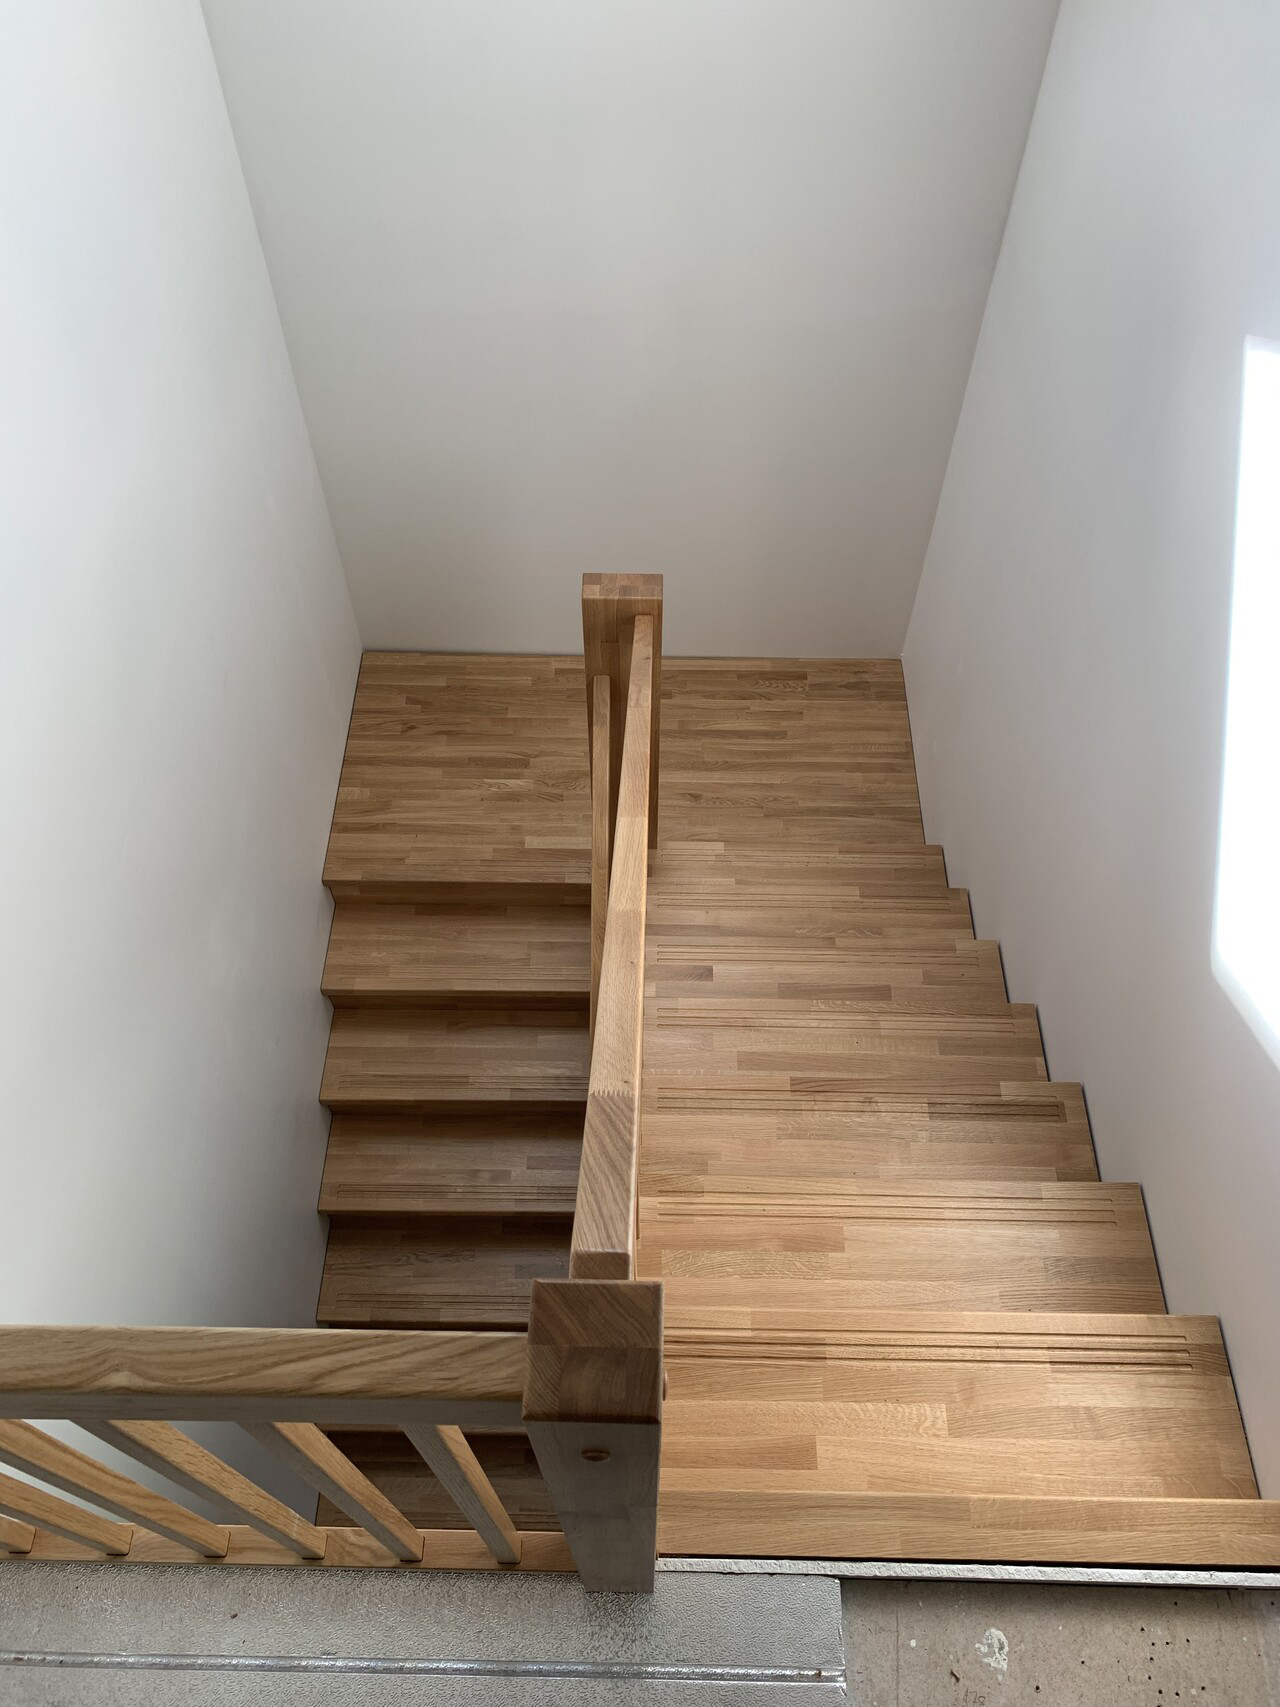 17. Oak staircase with parquet pattern sliding grooves